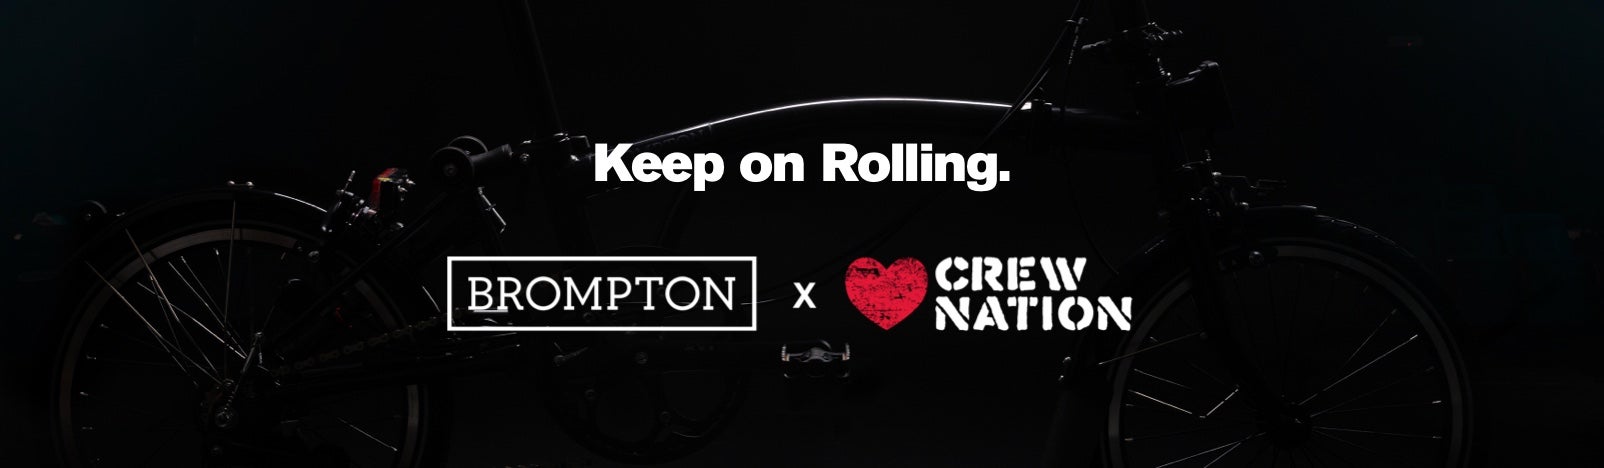 A black graphic image of Brompton x Crew Nation